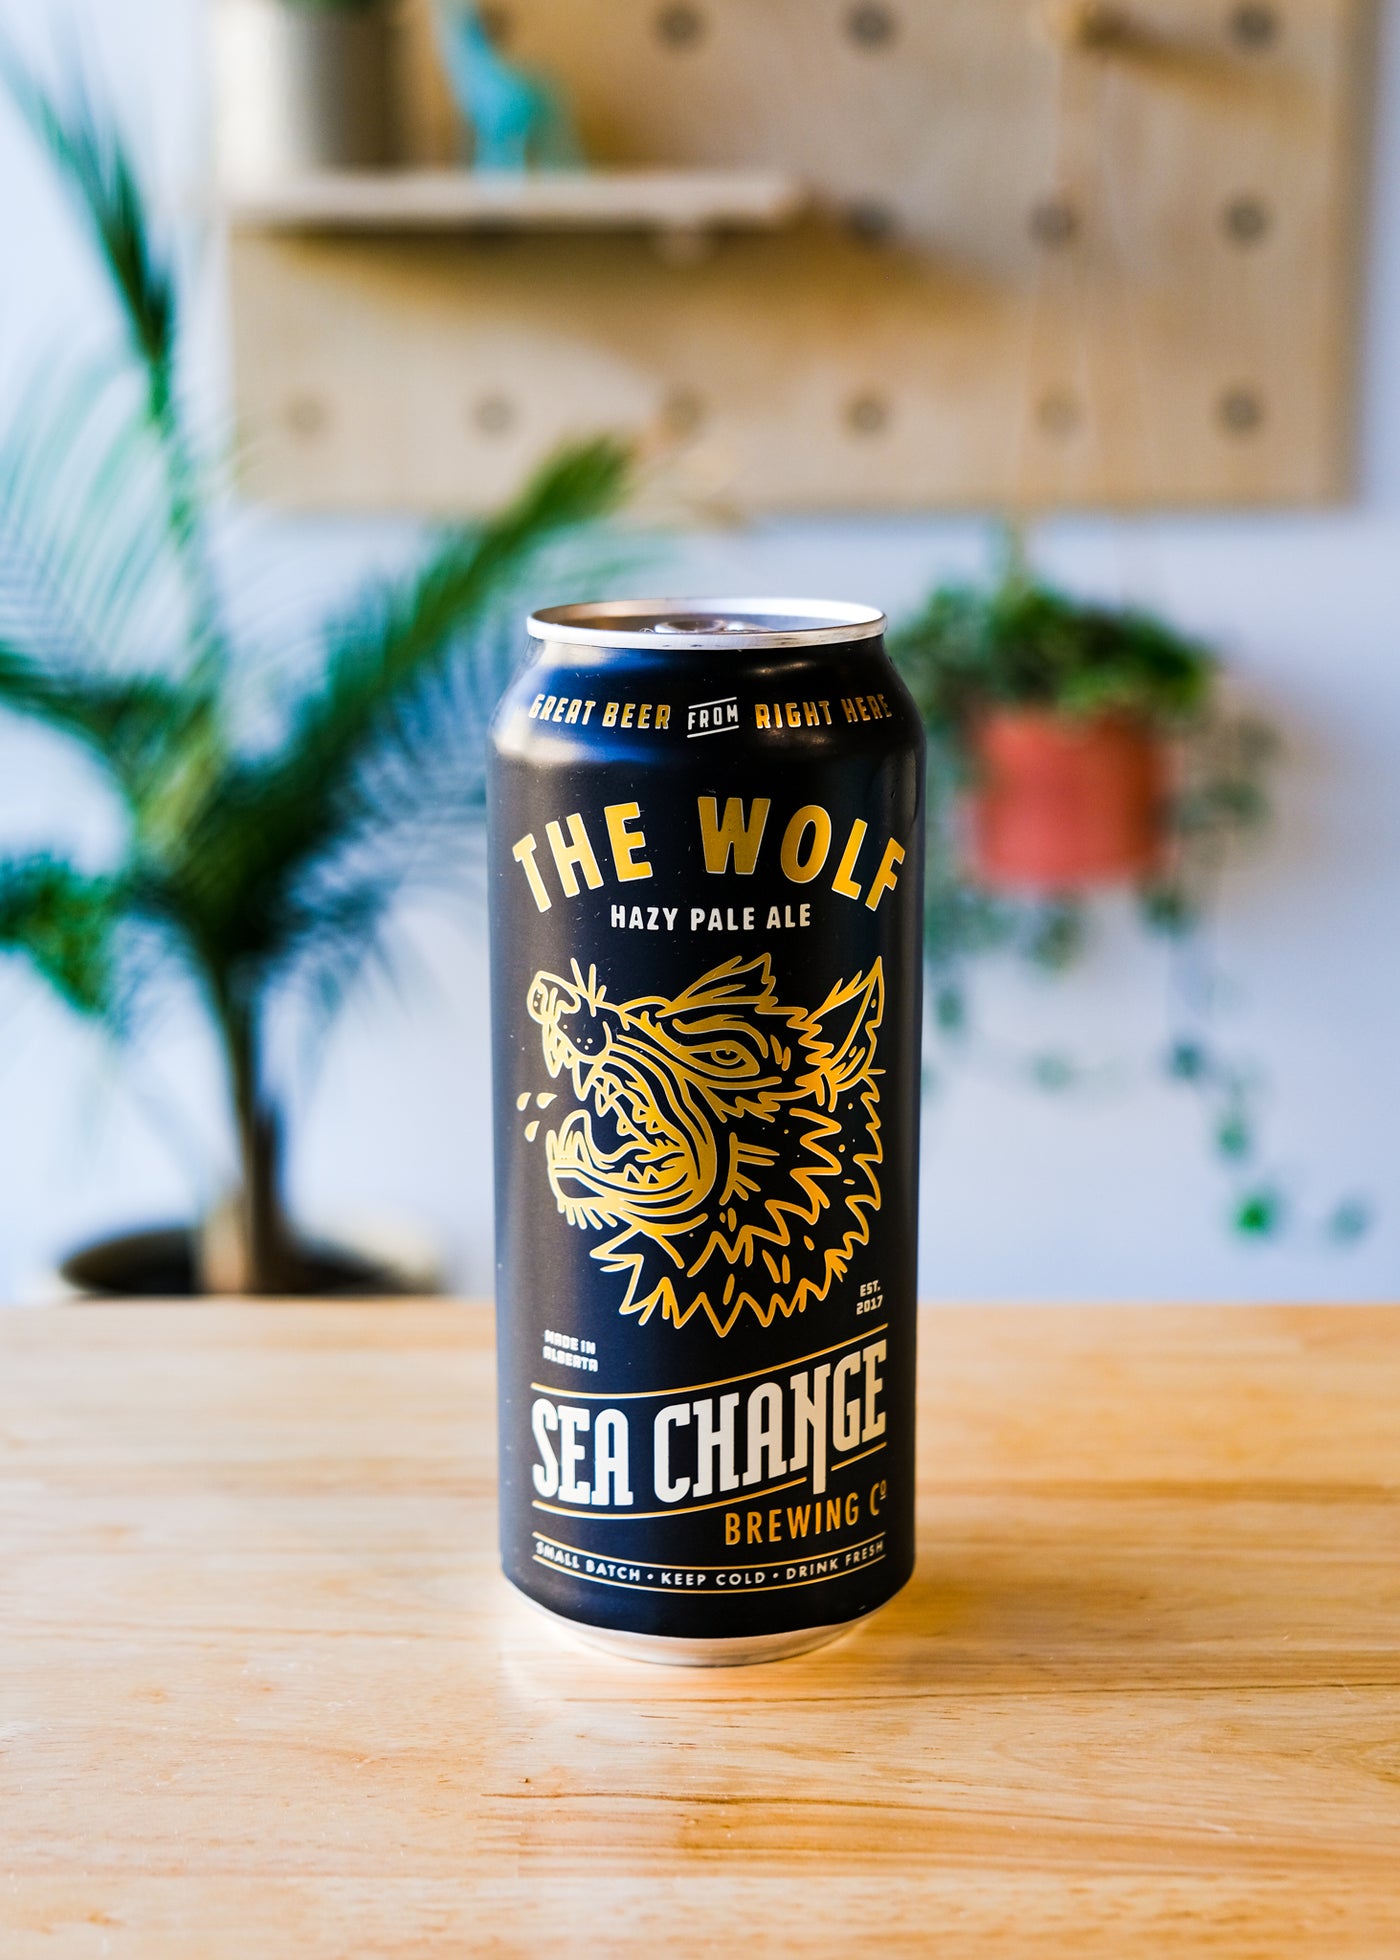 THE WOLF | Hazy Pale Ale